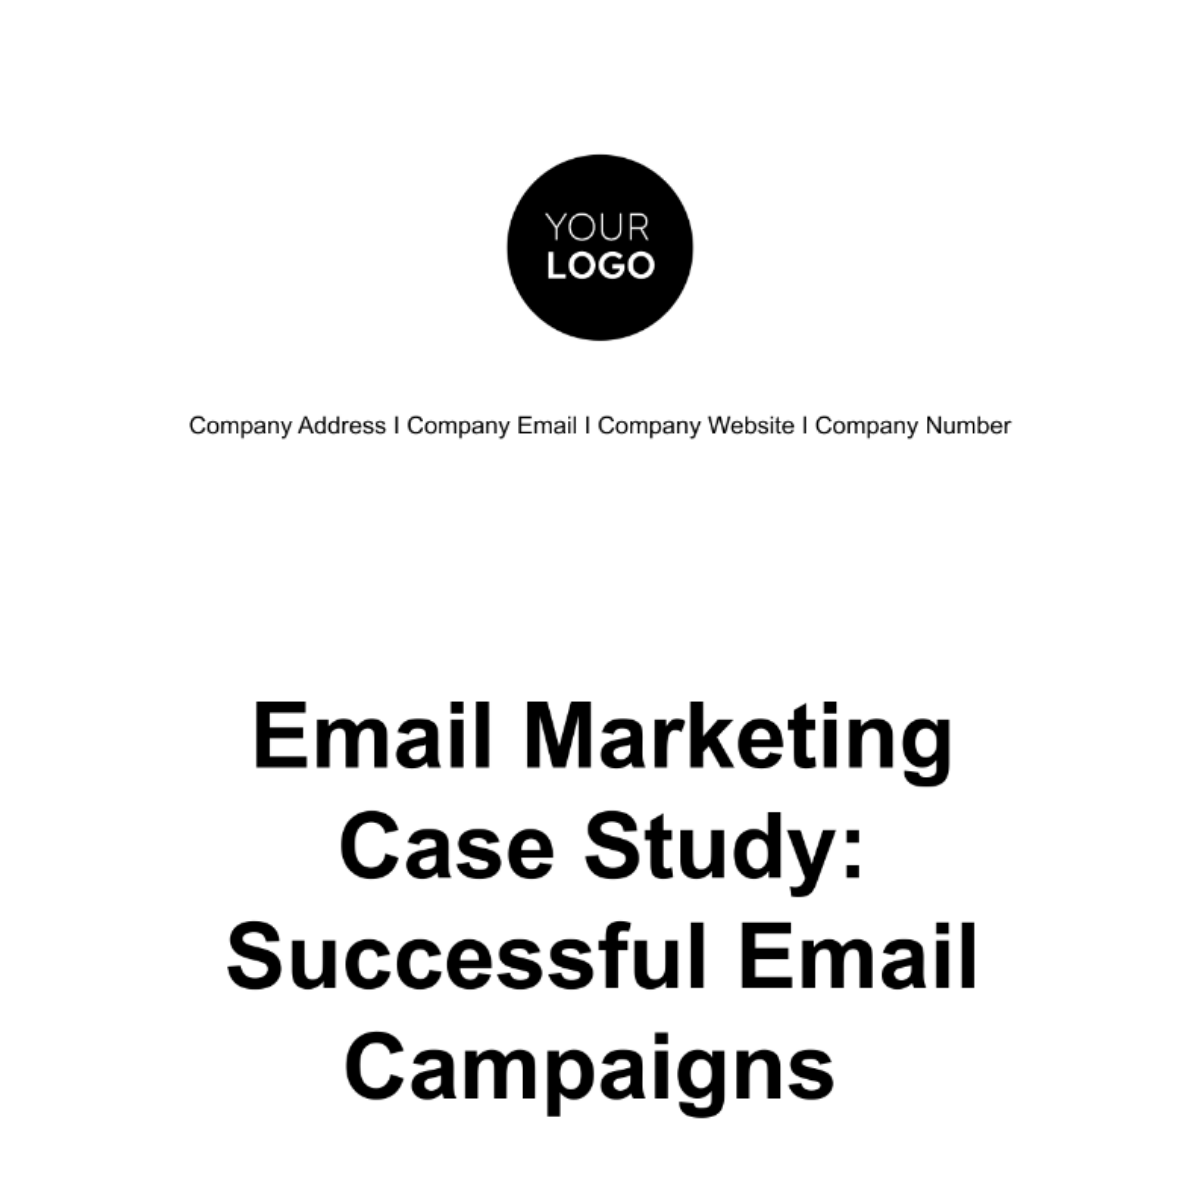 Email Marketing Case Study: Successful Email Campaigns Template